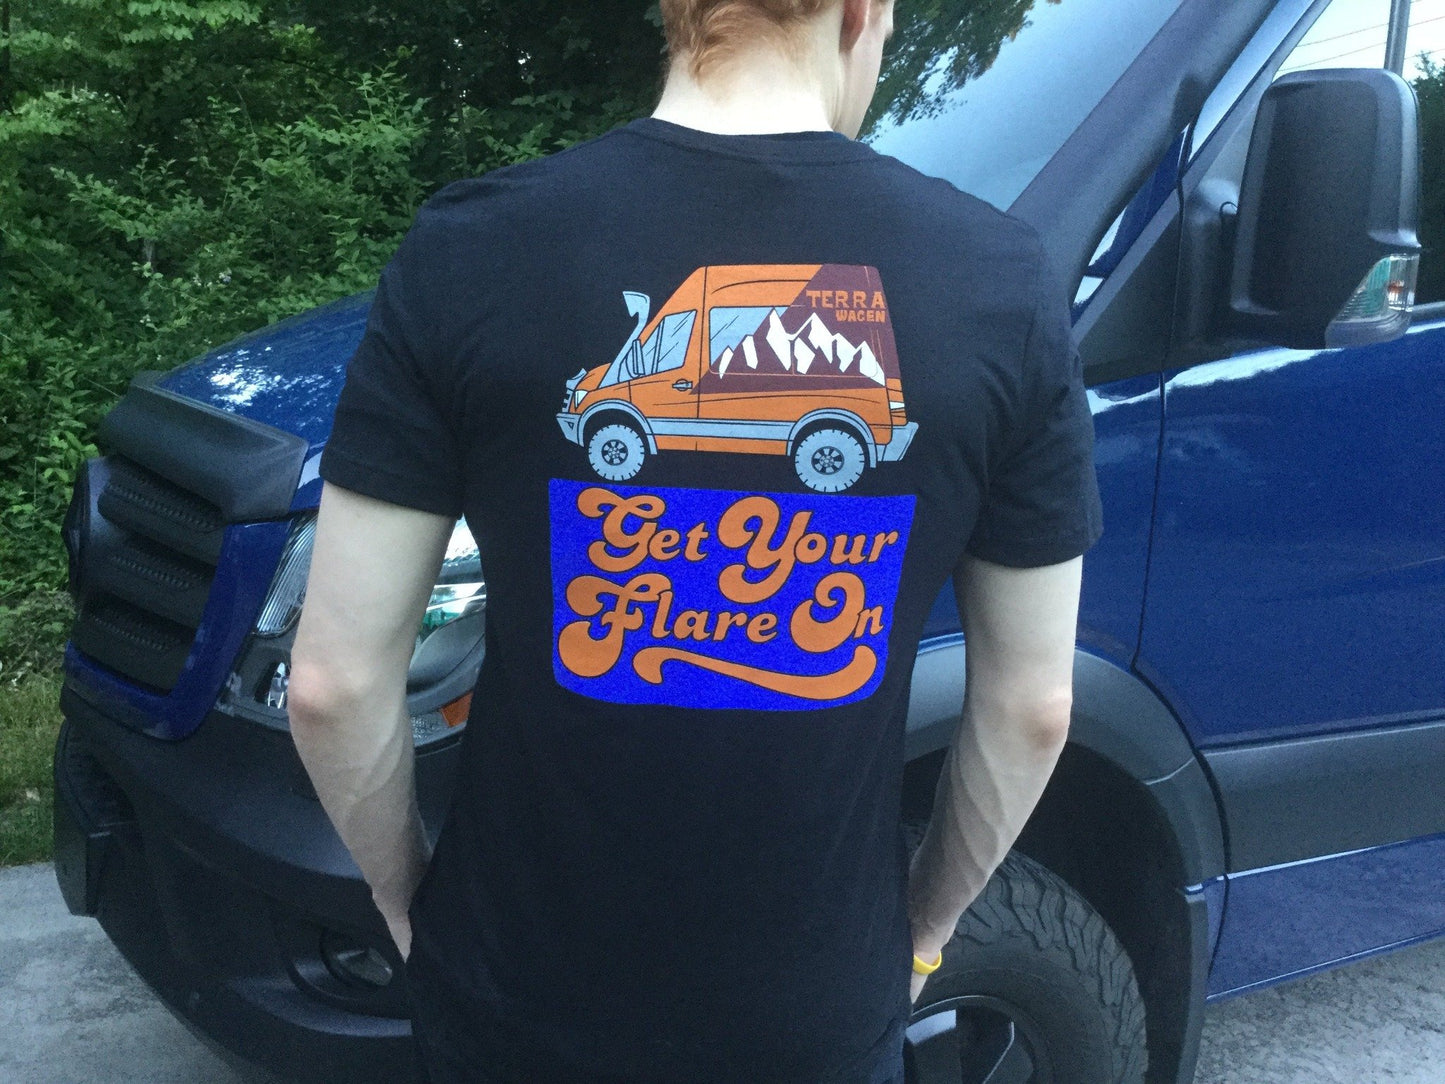 T-shirt Terrawagen "Get your flare on"